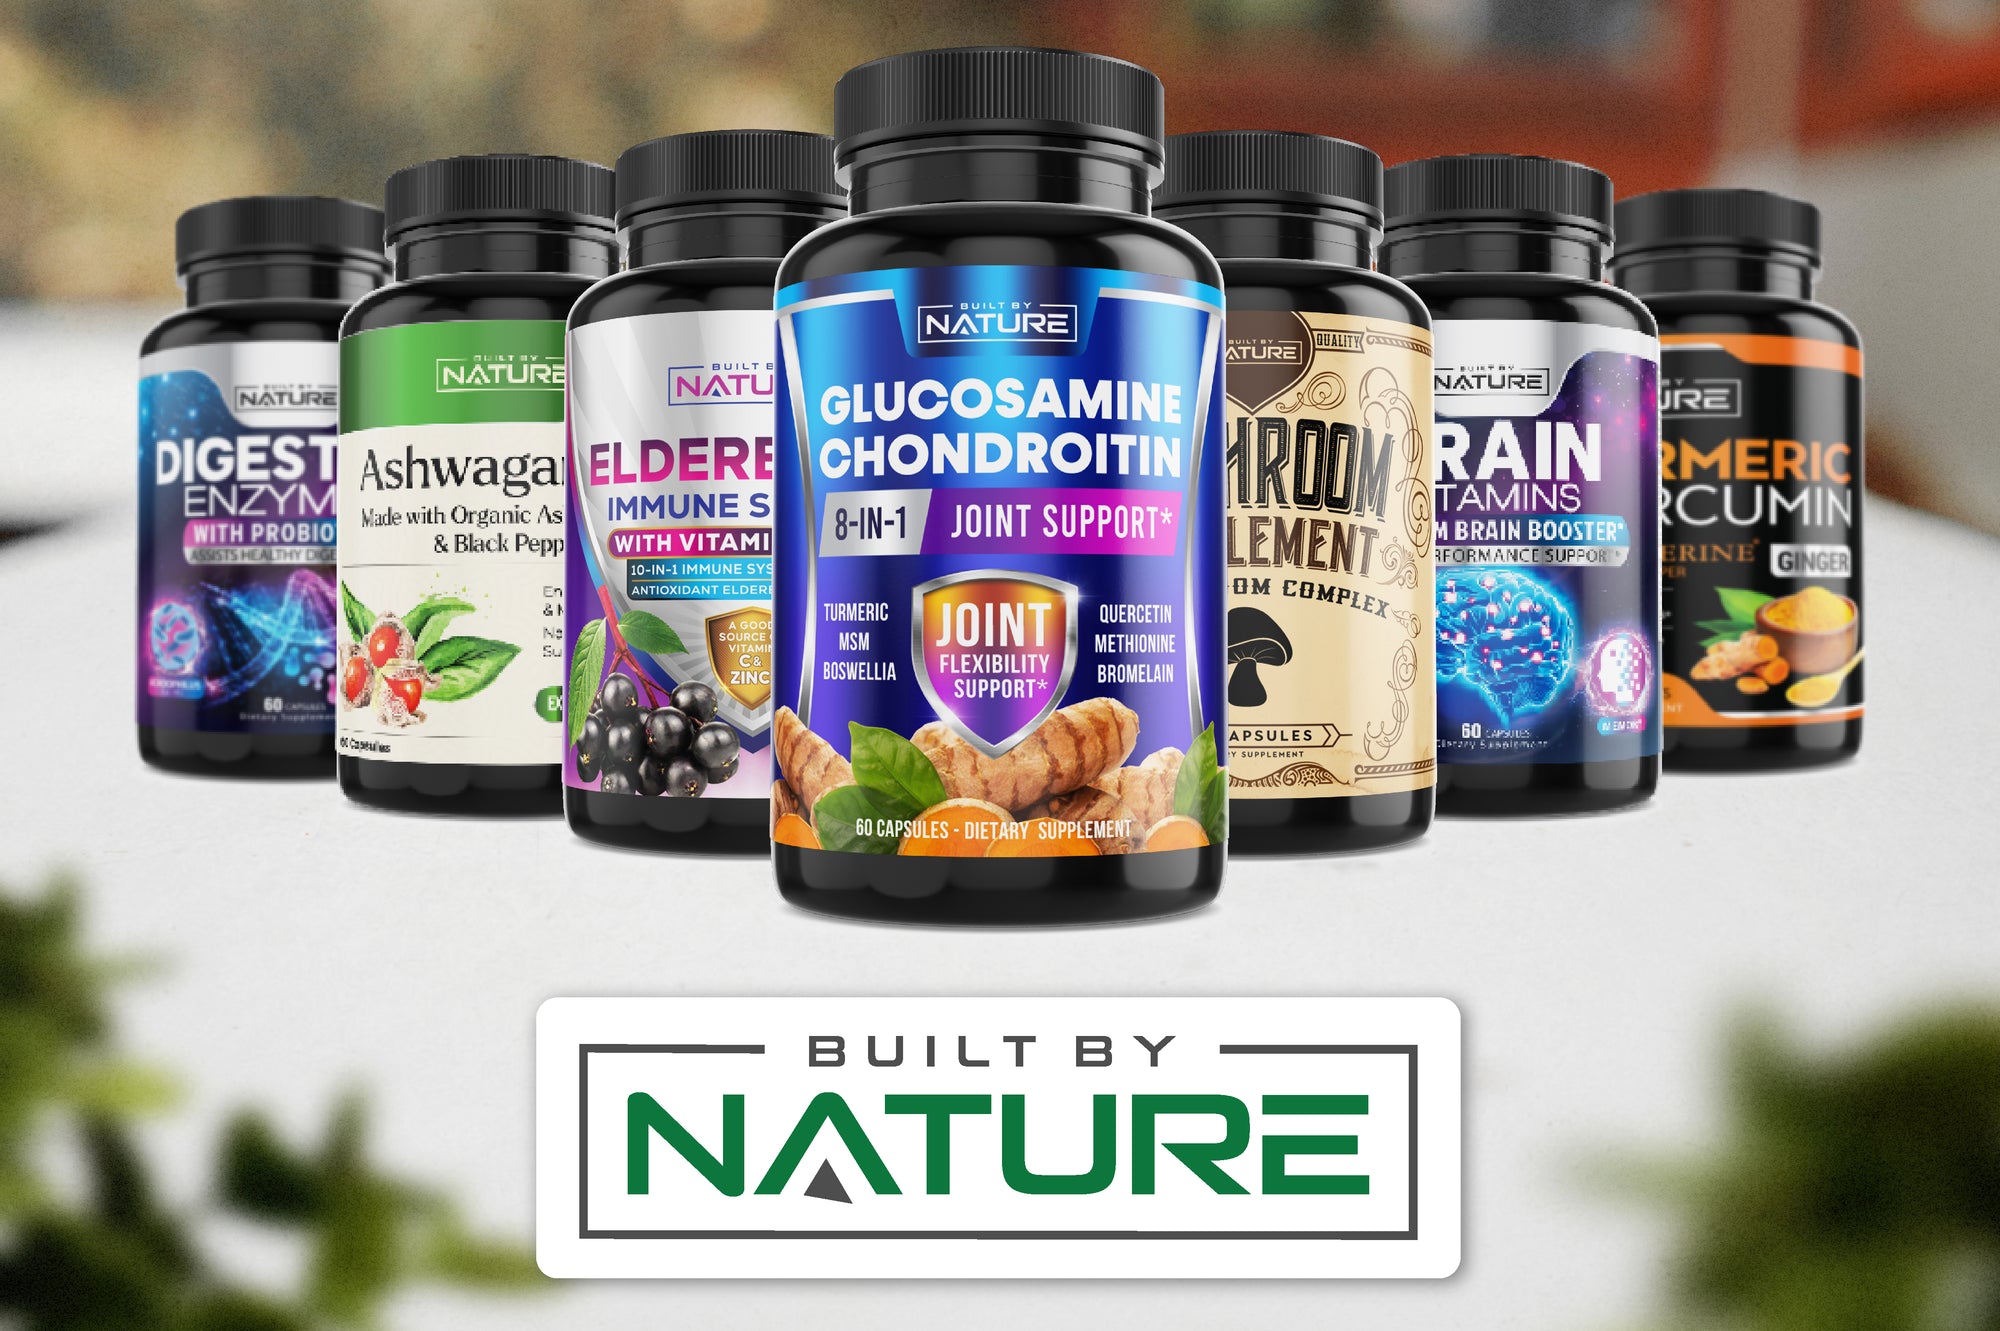 Built By Nature - Quality Supplements at Affordable Prices